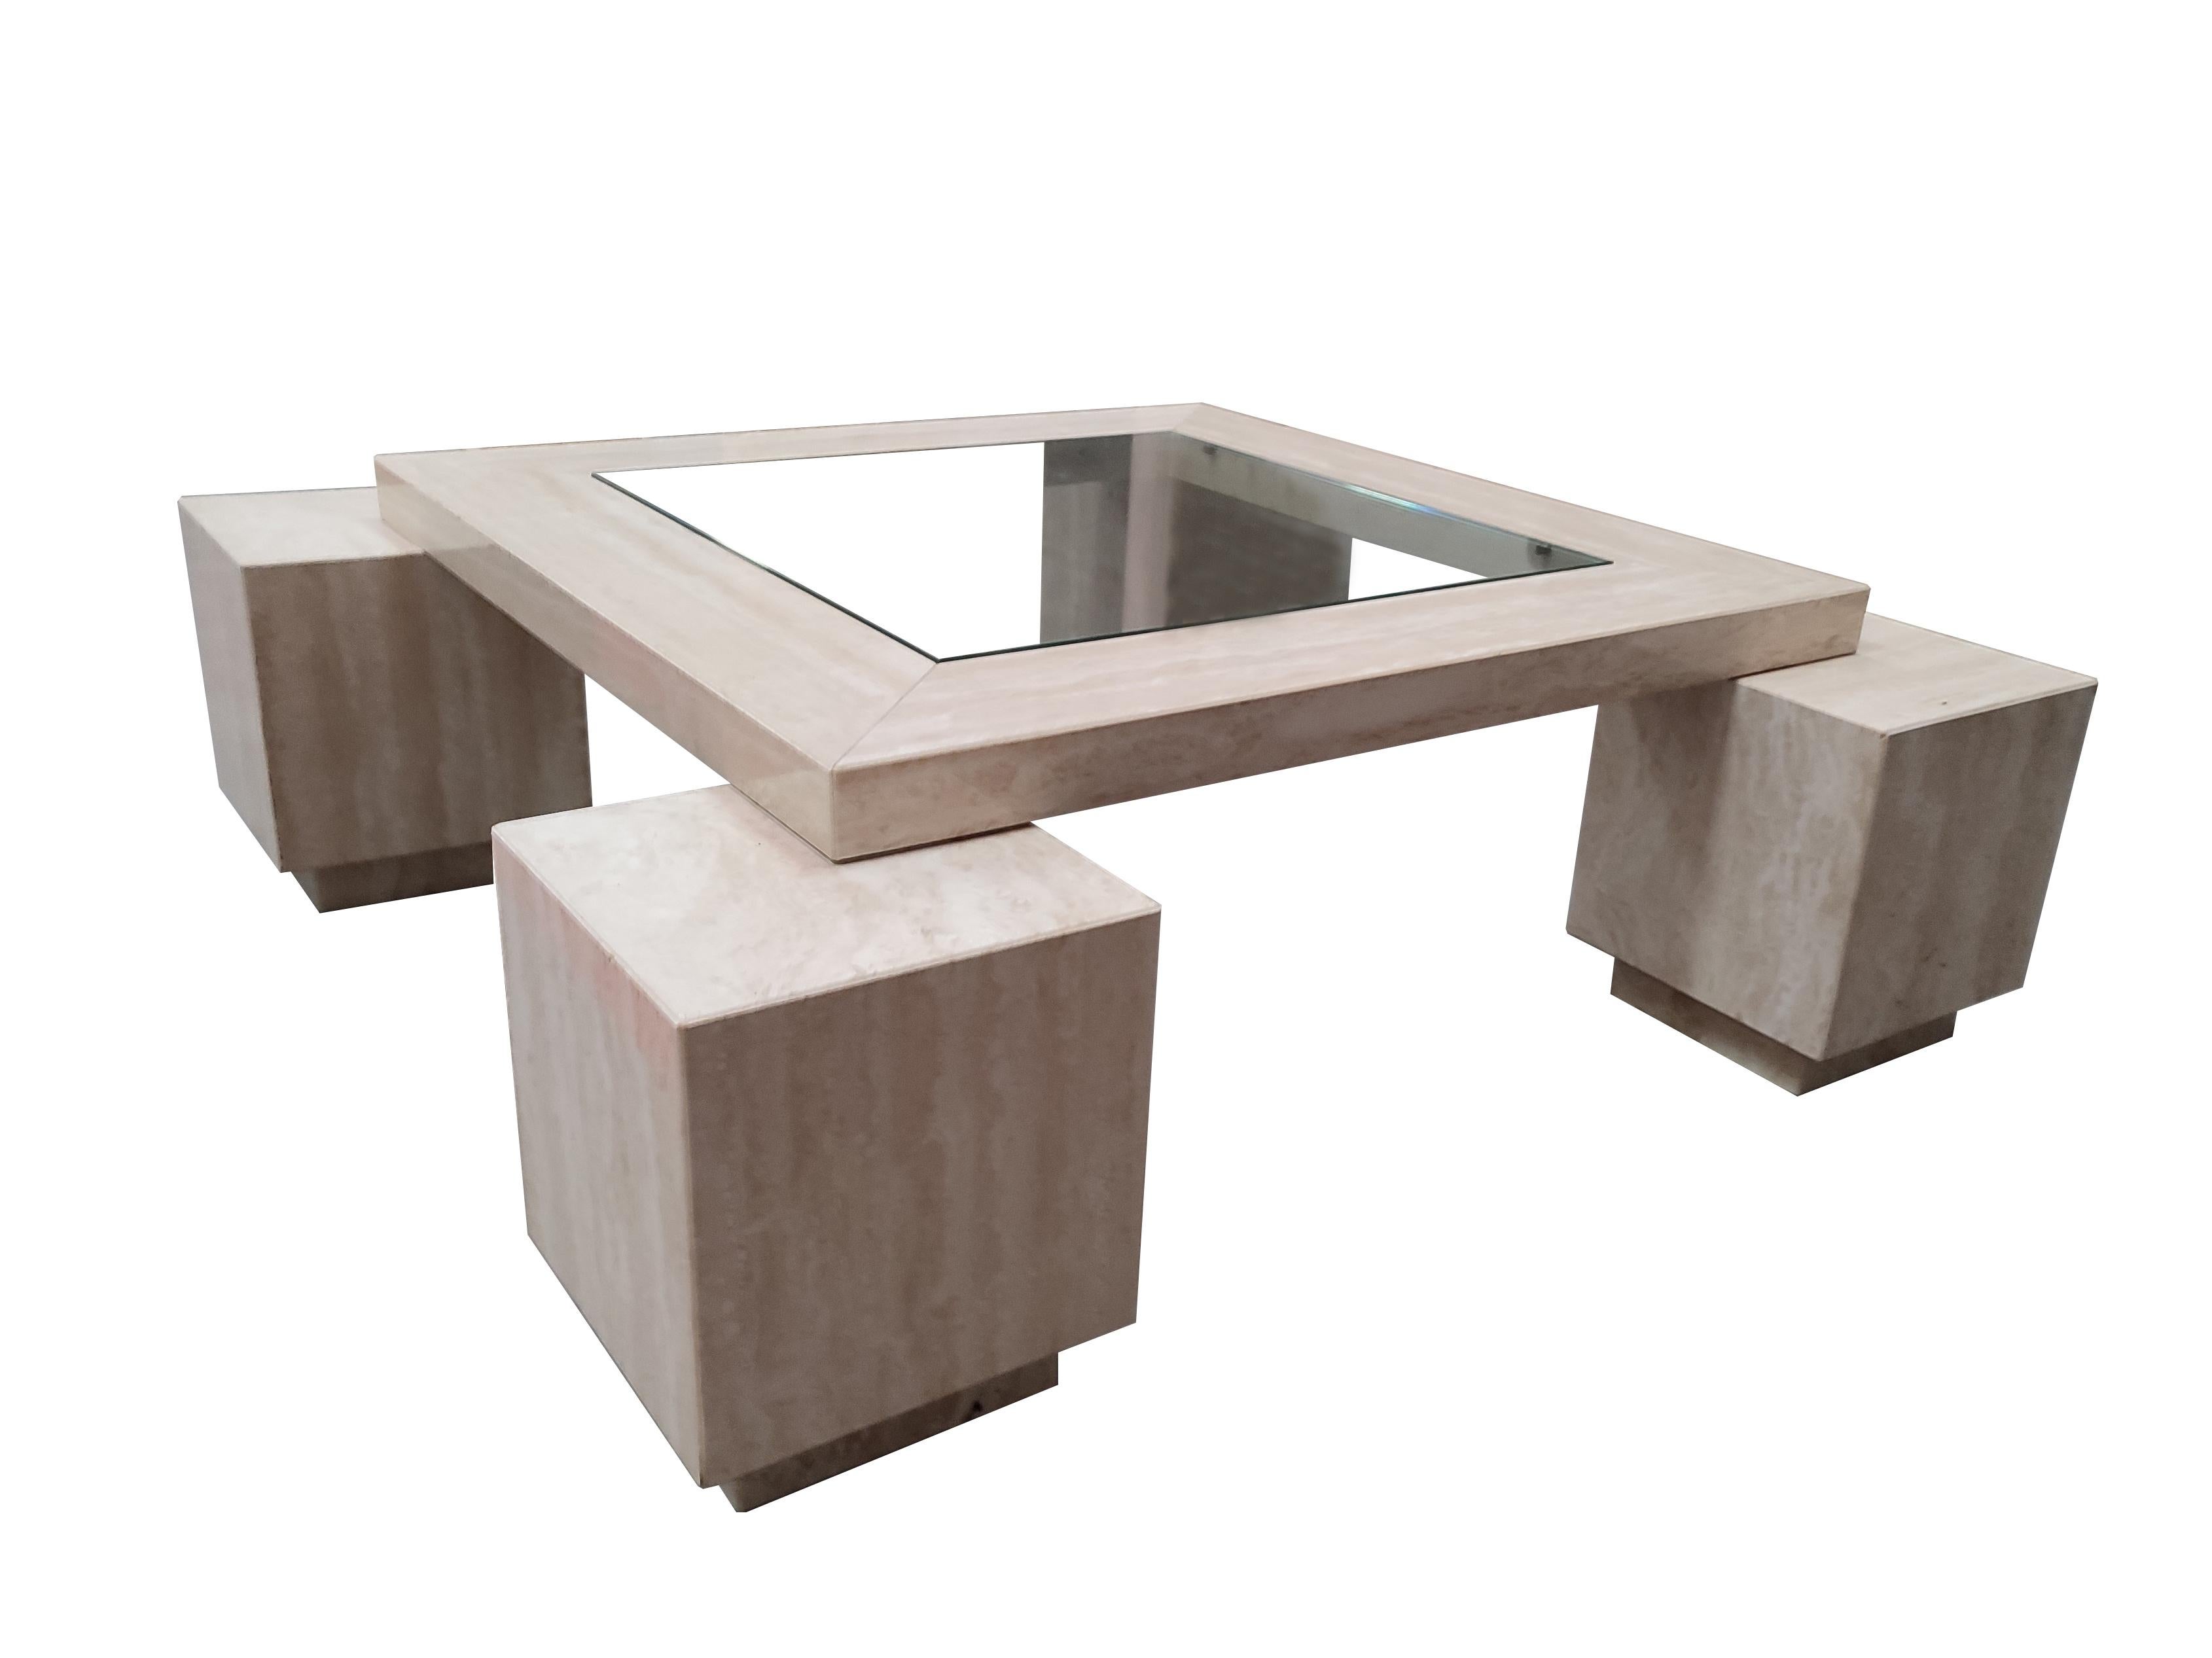 Late 20th Century CUADROS MidCentury Polished Travertine Marble Coffee Table Original 80's Piece For Sale